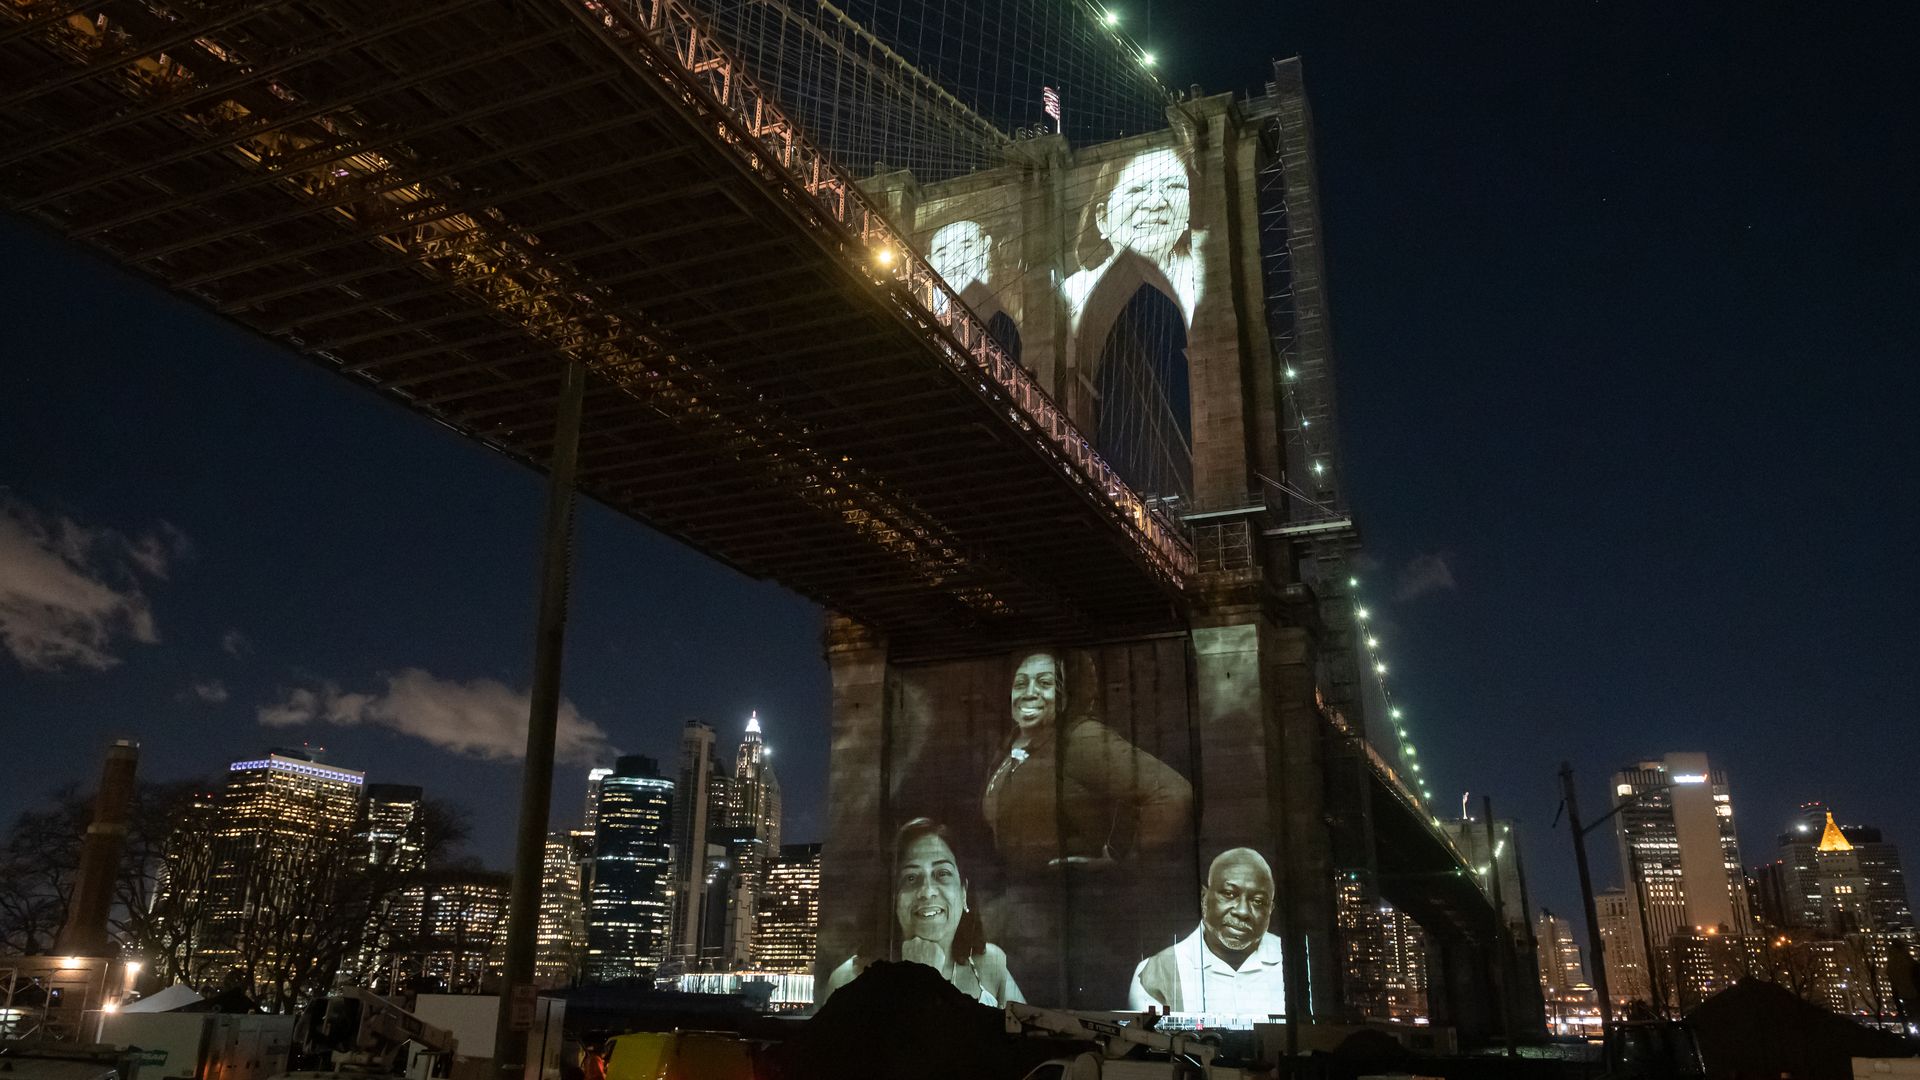 Photos of people who died from COVID-19 projected on the Brooklyn Bridge in New York City on March 14.